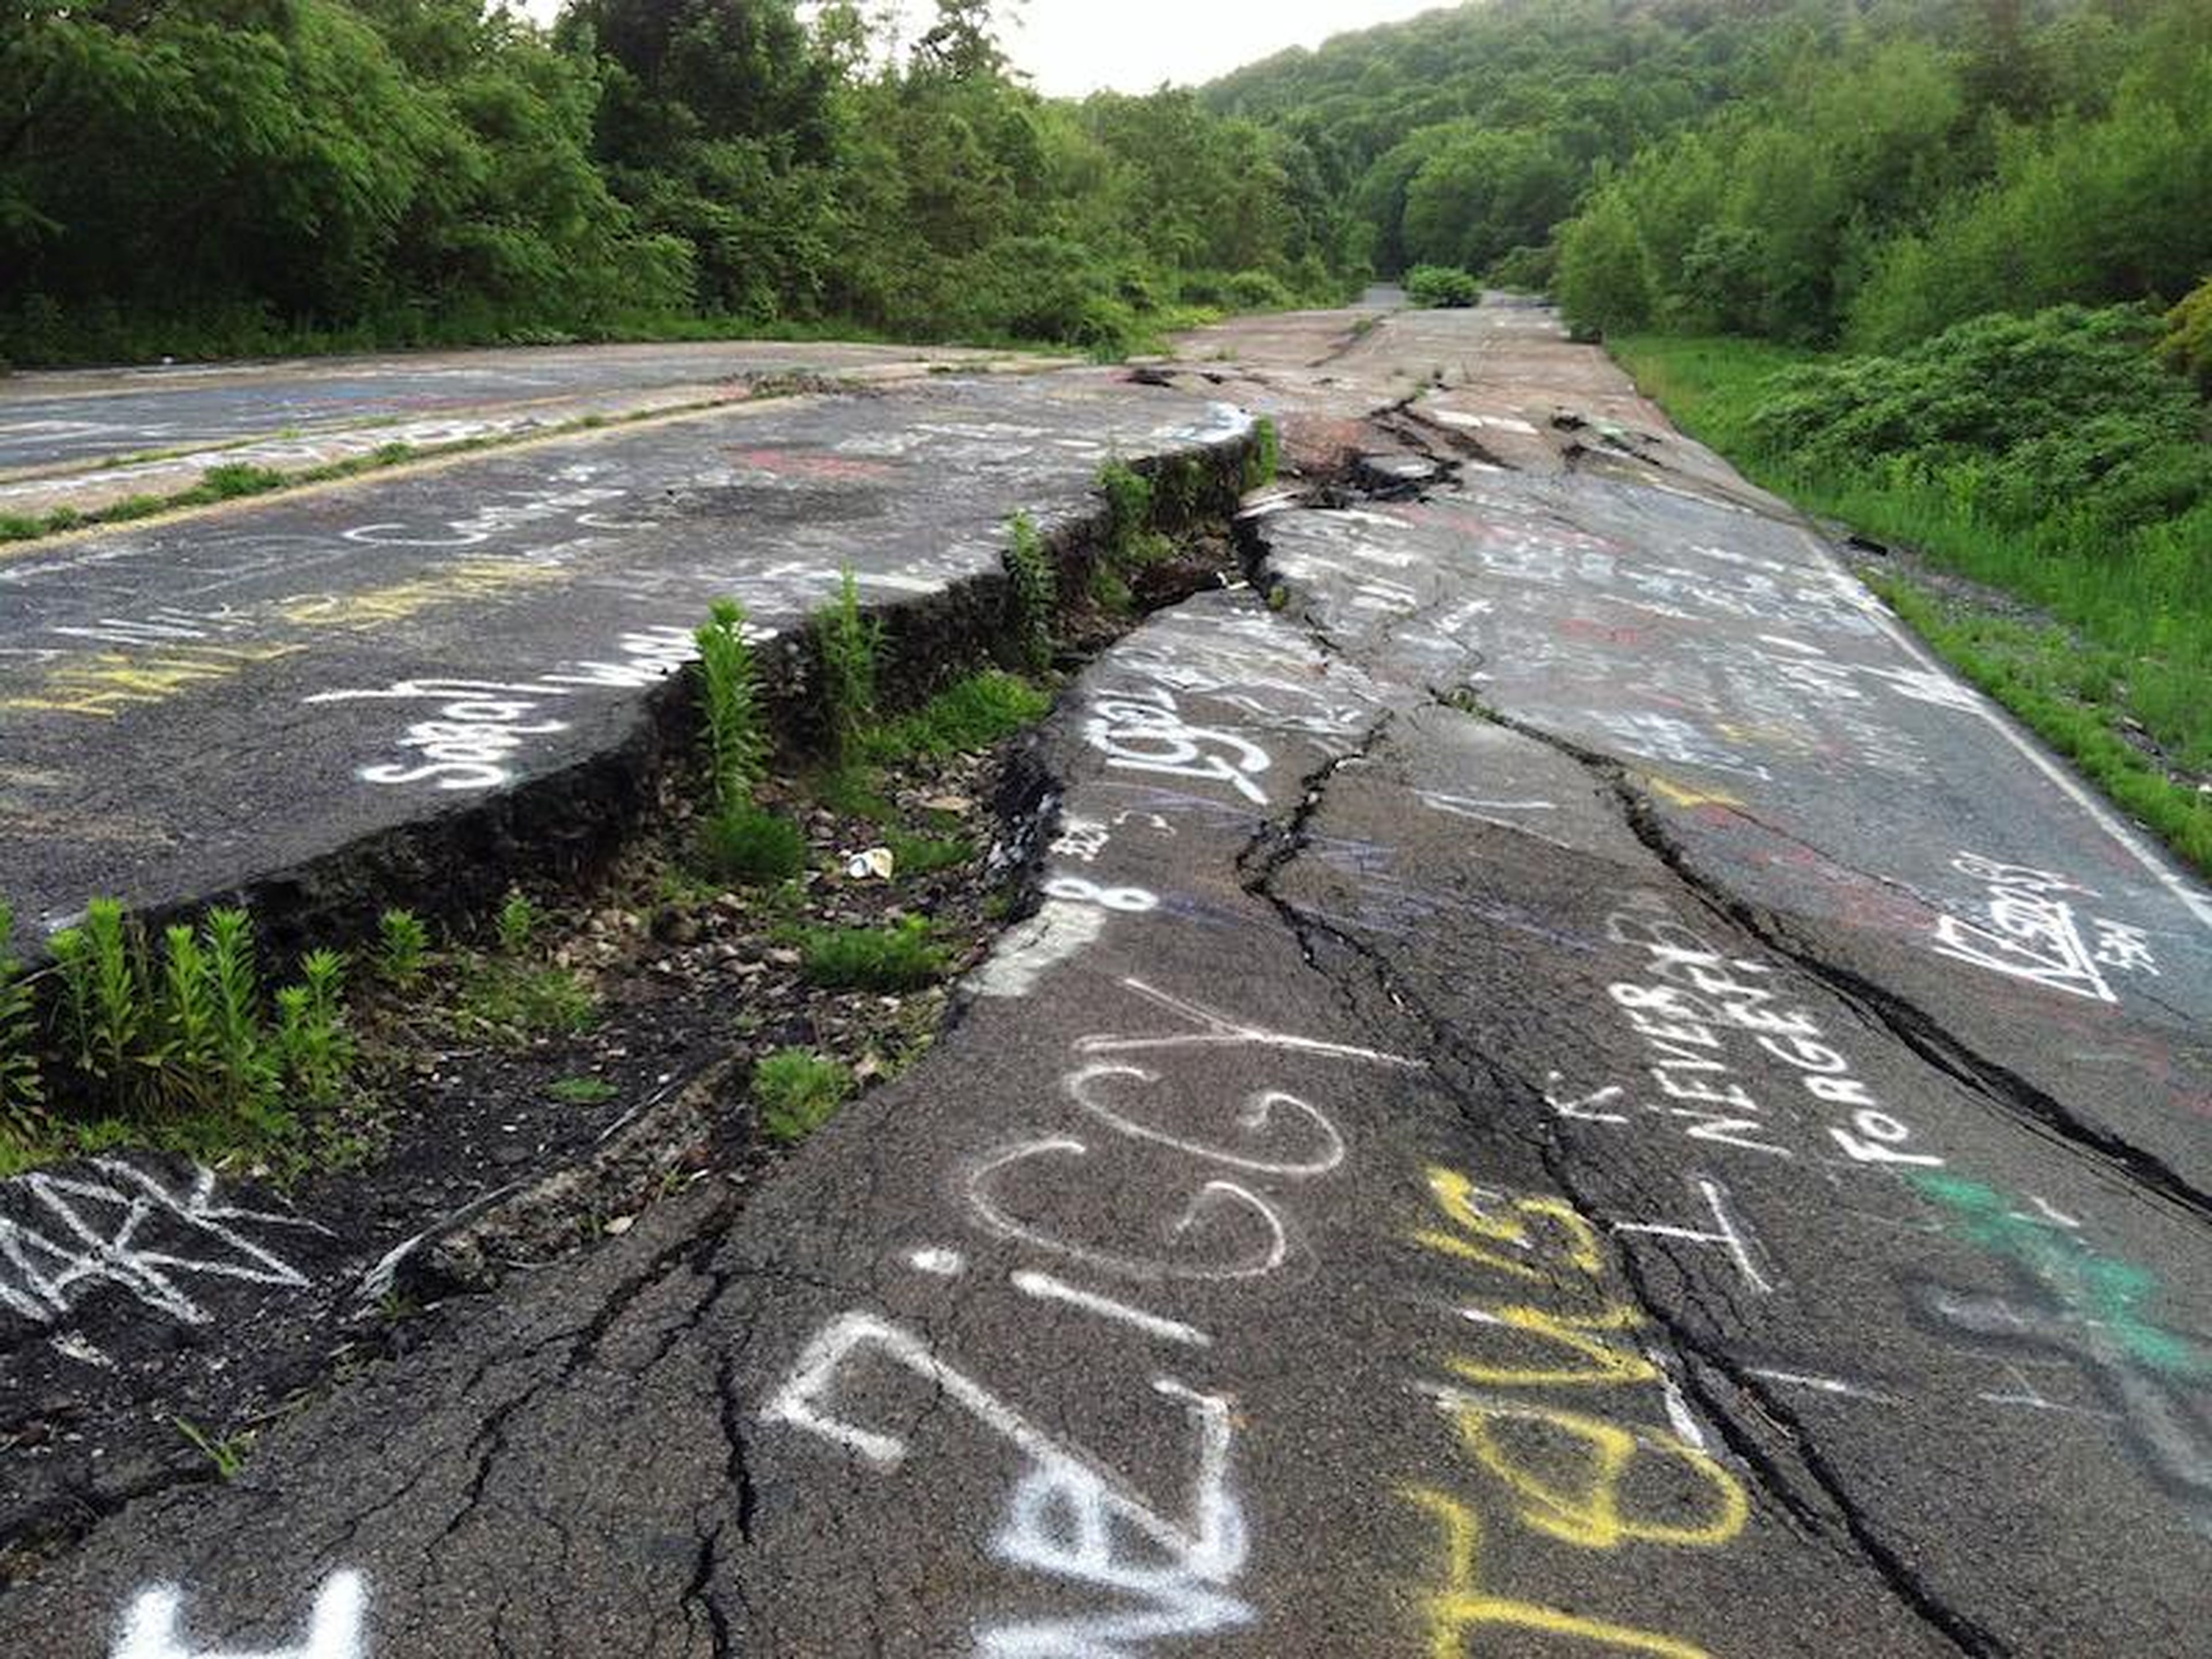 Centralia has been on fire for over 50 years.